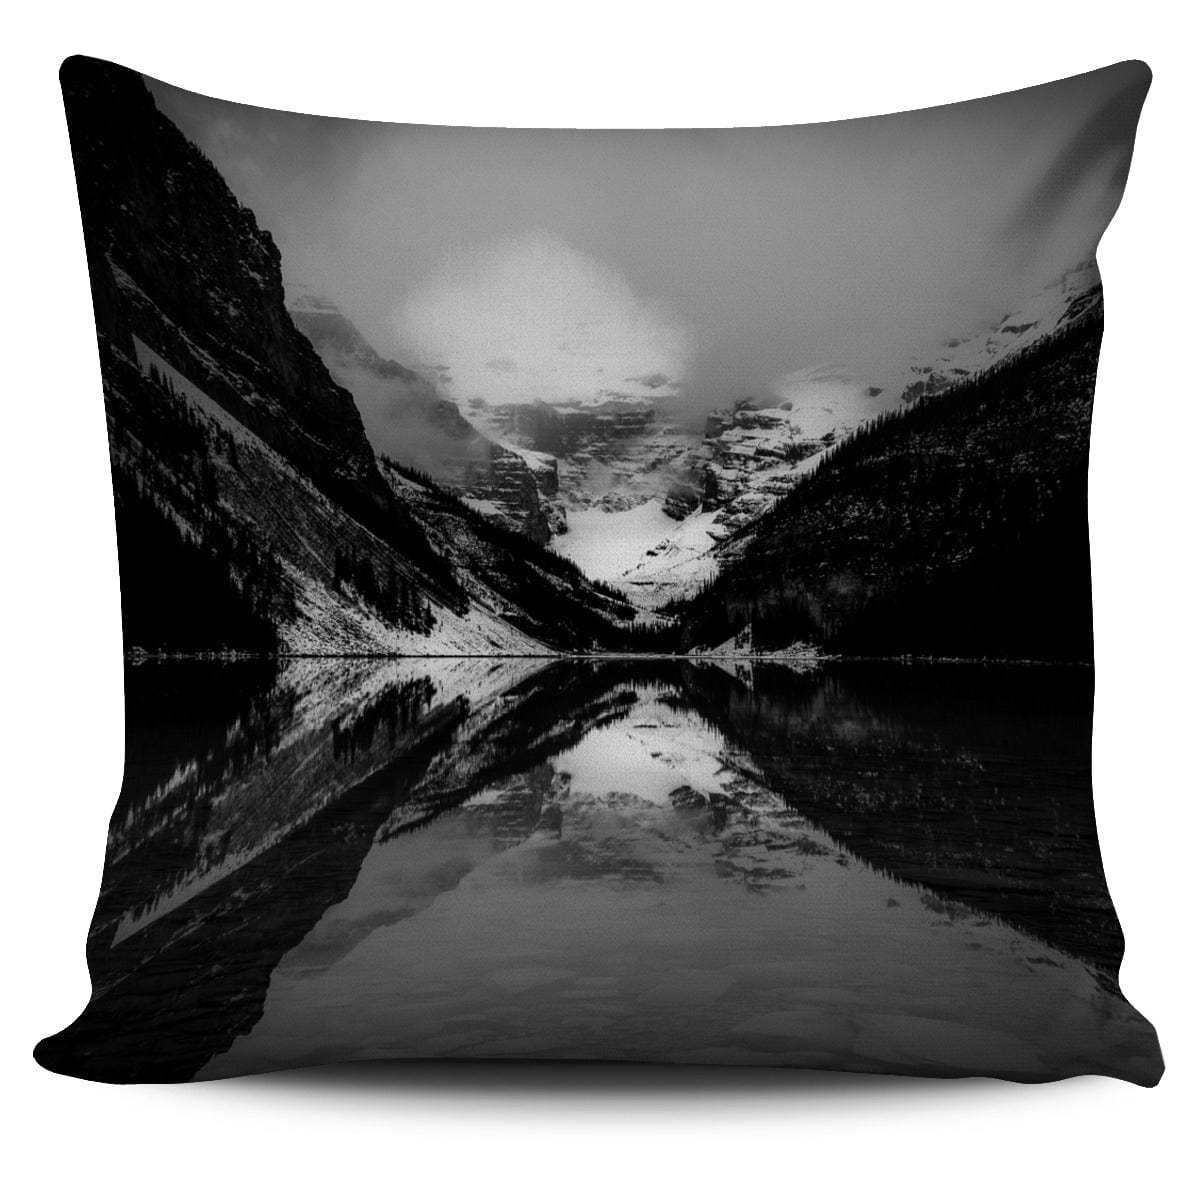 Pillow Cover - Lake Louise - Black and White - GiddyGoatStore